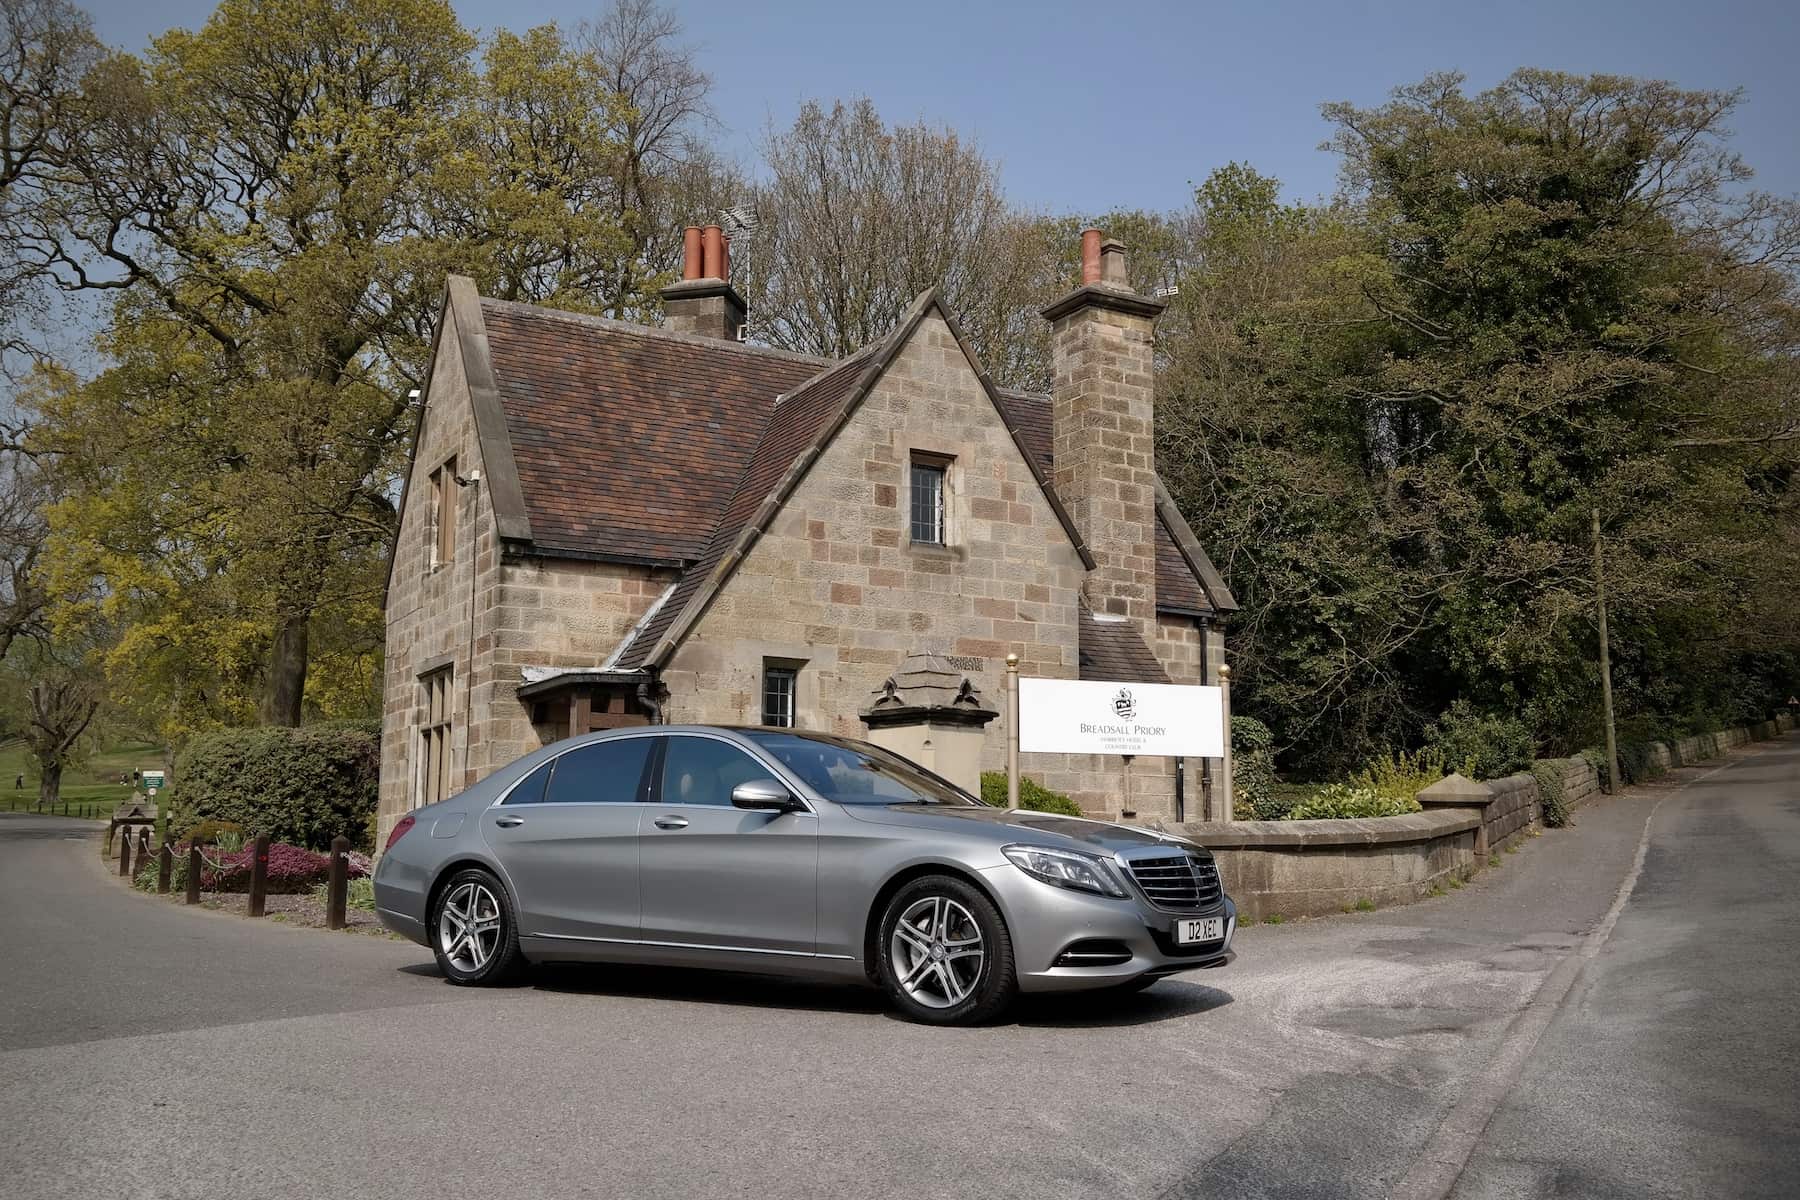 Mercedes S Class Chauffeur at Breadsall Priory Hotel, Derby